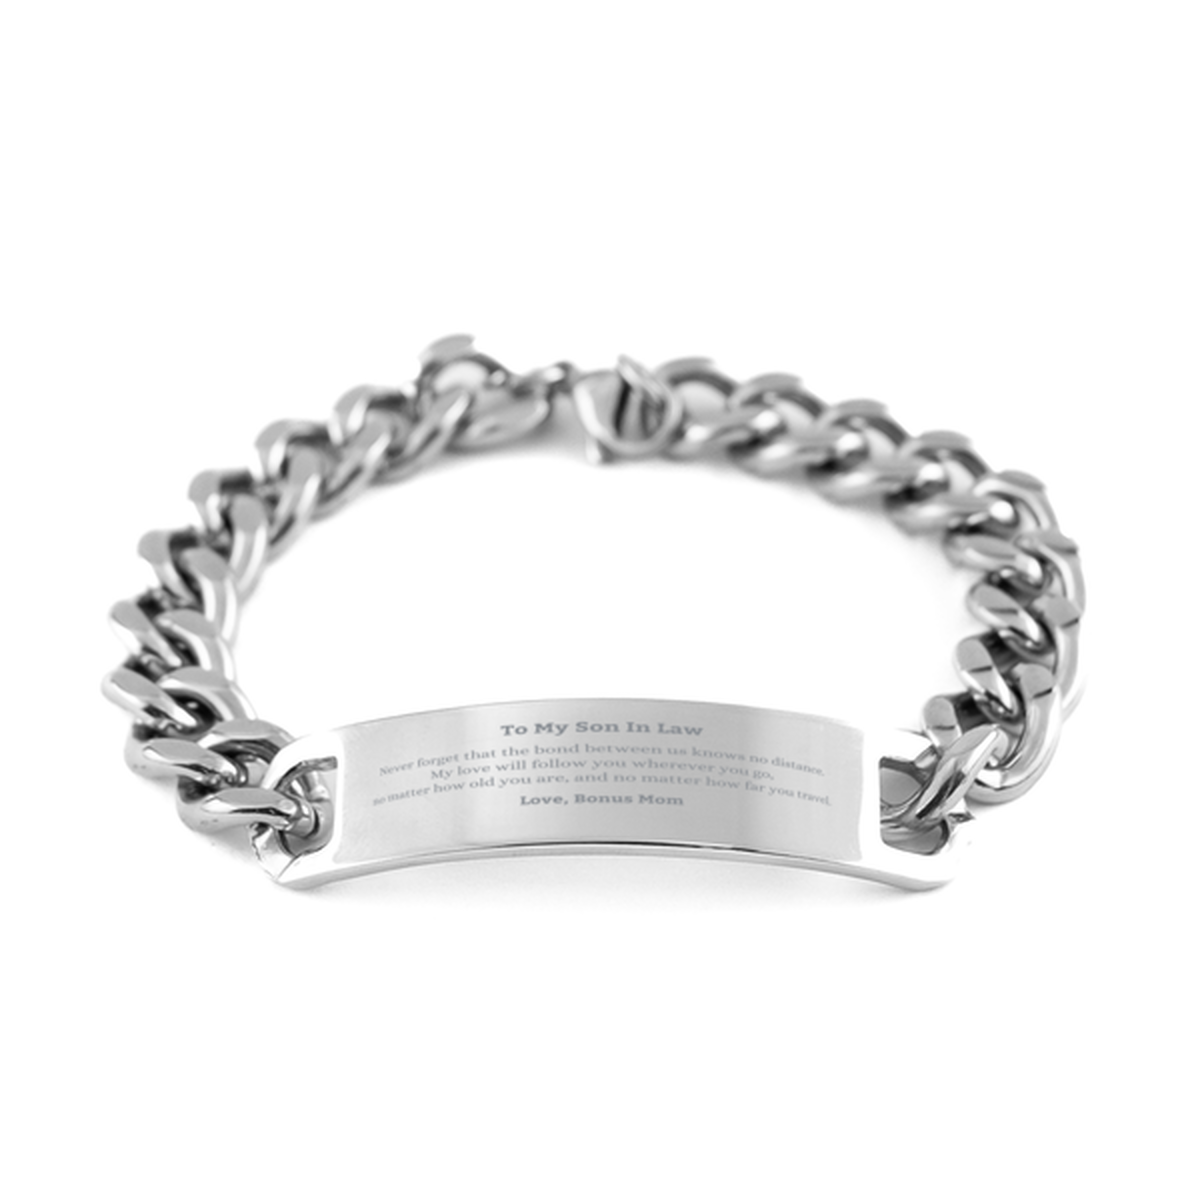 Son In Law Birthday Gifts from Bonus Mom, Adjustable Cuban Chain Stainless Steel Bracelet for Son In Law Christmas Graduation Unique Gifts Son In Law Never forget that the bond between us knows no distance. Love, Bonus Mom